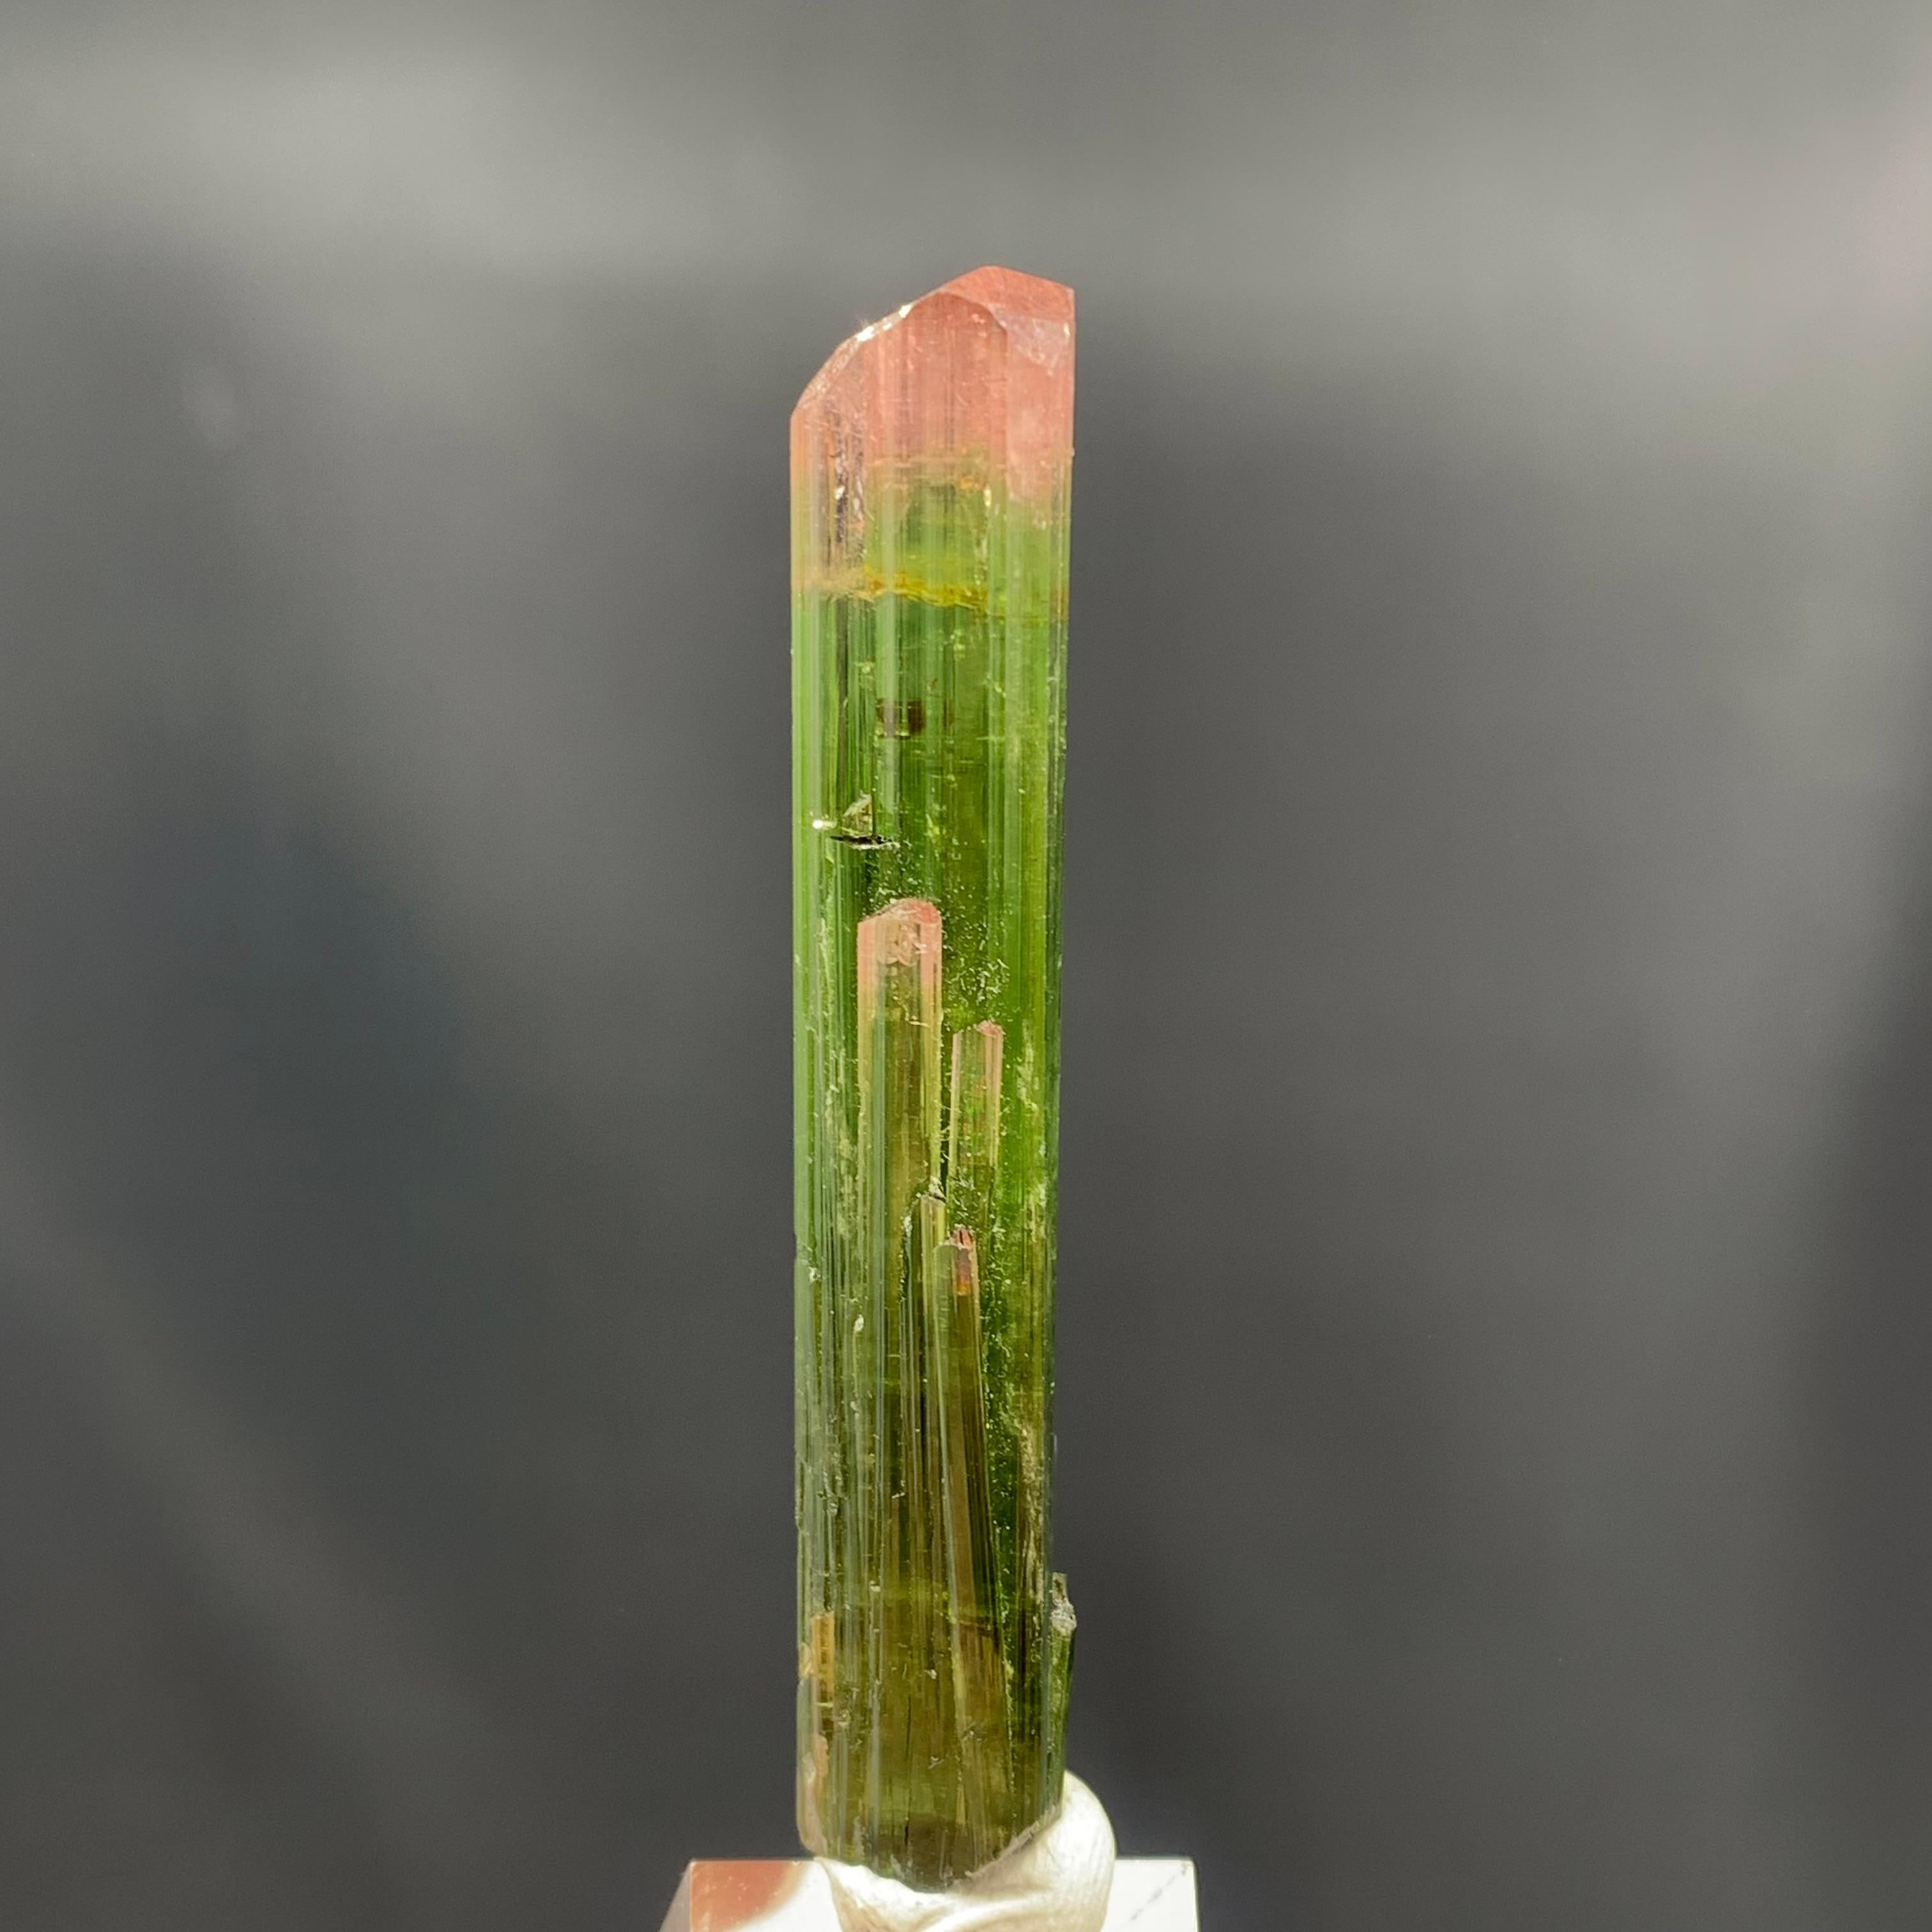 Other Gorgeous 53.65 Carat Bi Color Tourmaline Crystal From Paprok Mine Afghanistan For Sale